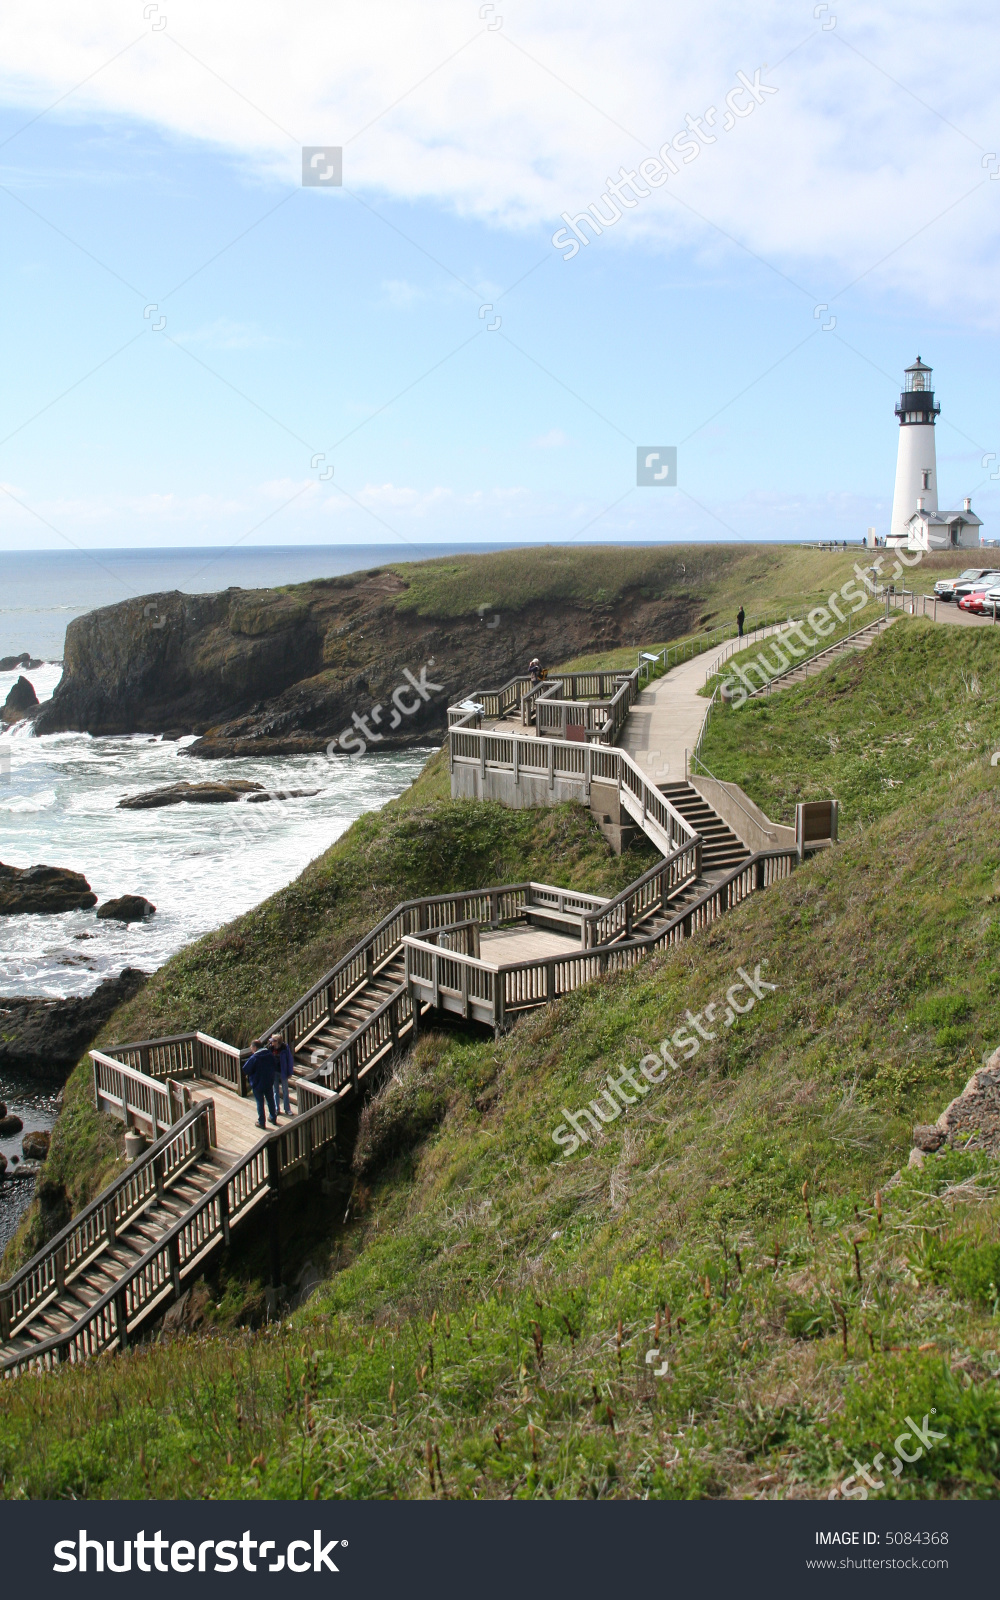 Wooden Stairs To Beach, Misty Day, Yaquina Head Lighthouse, Agate.